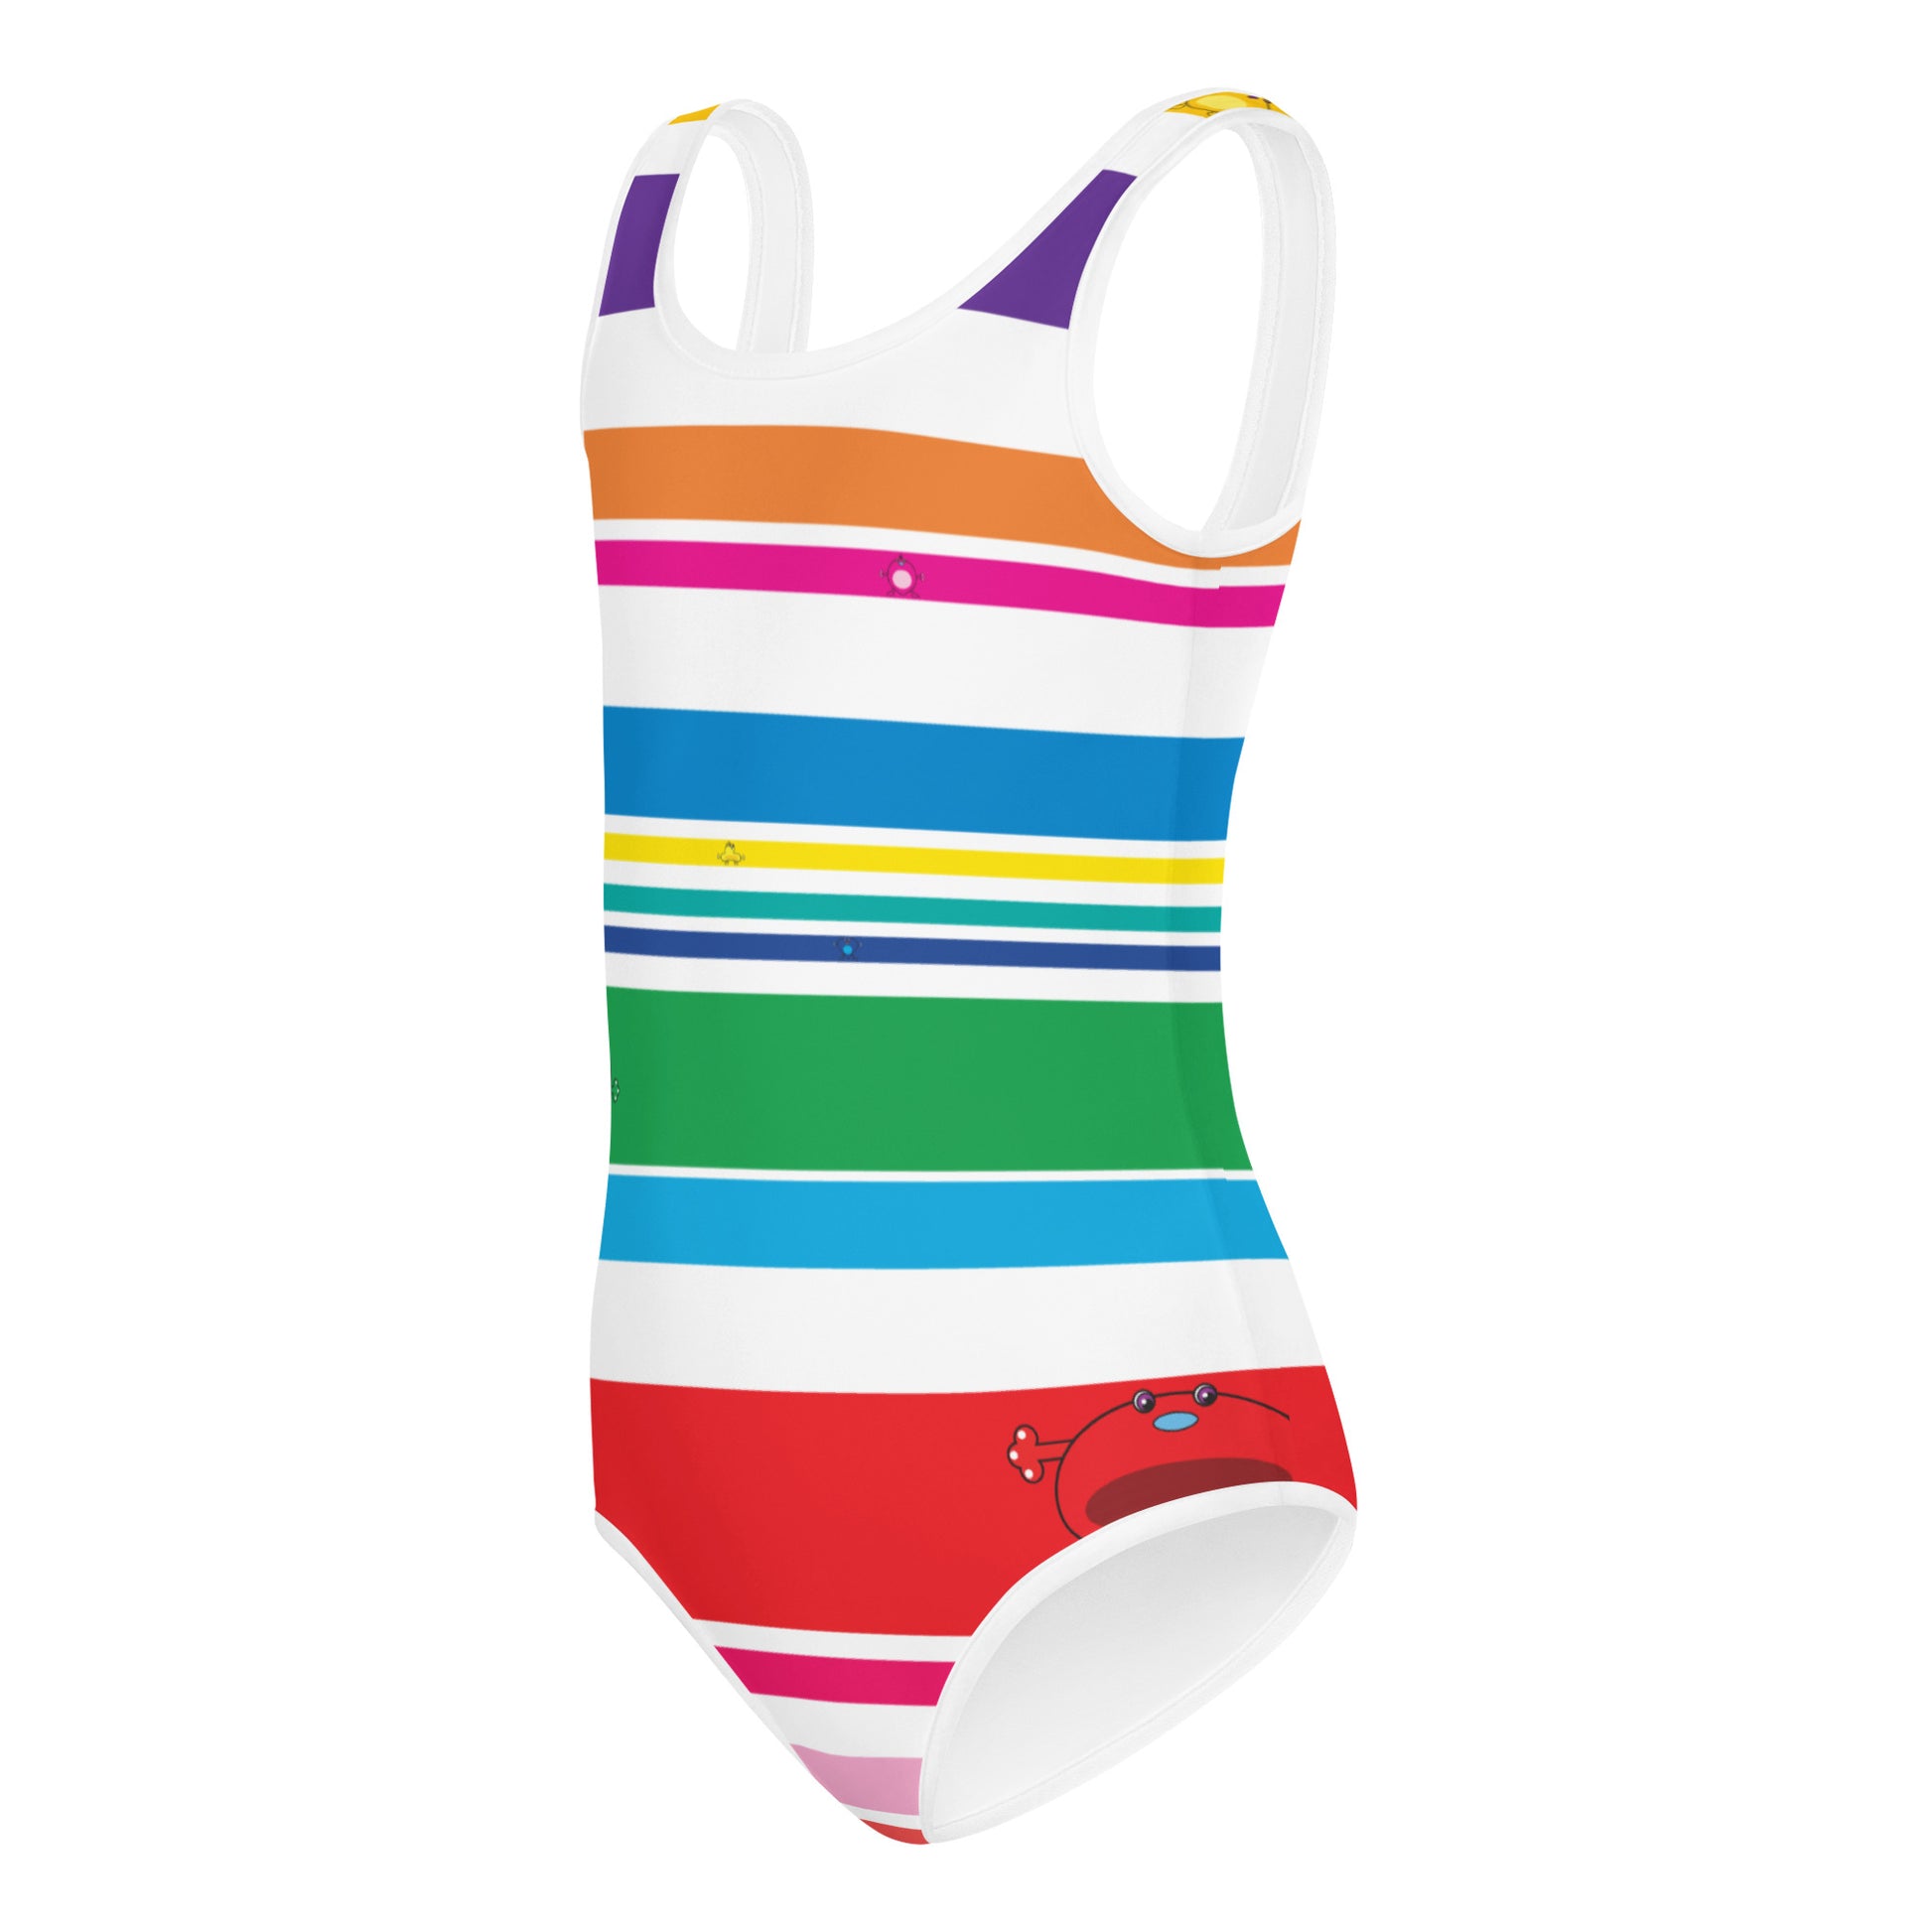 white girls swim suite with coloured stripes and monsters 3D side view